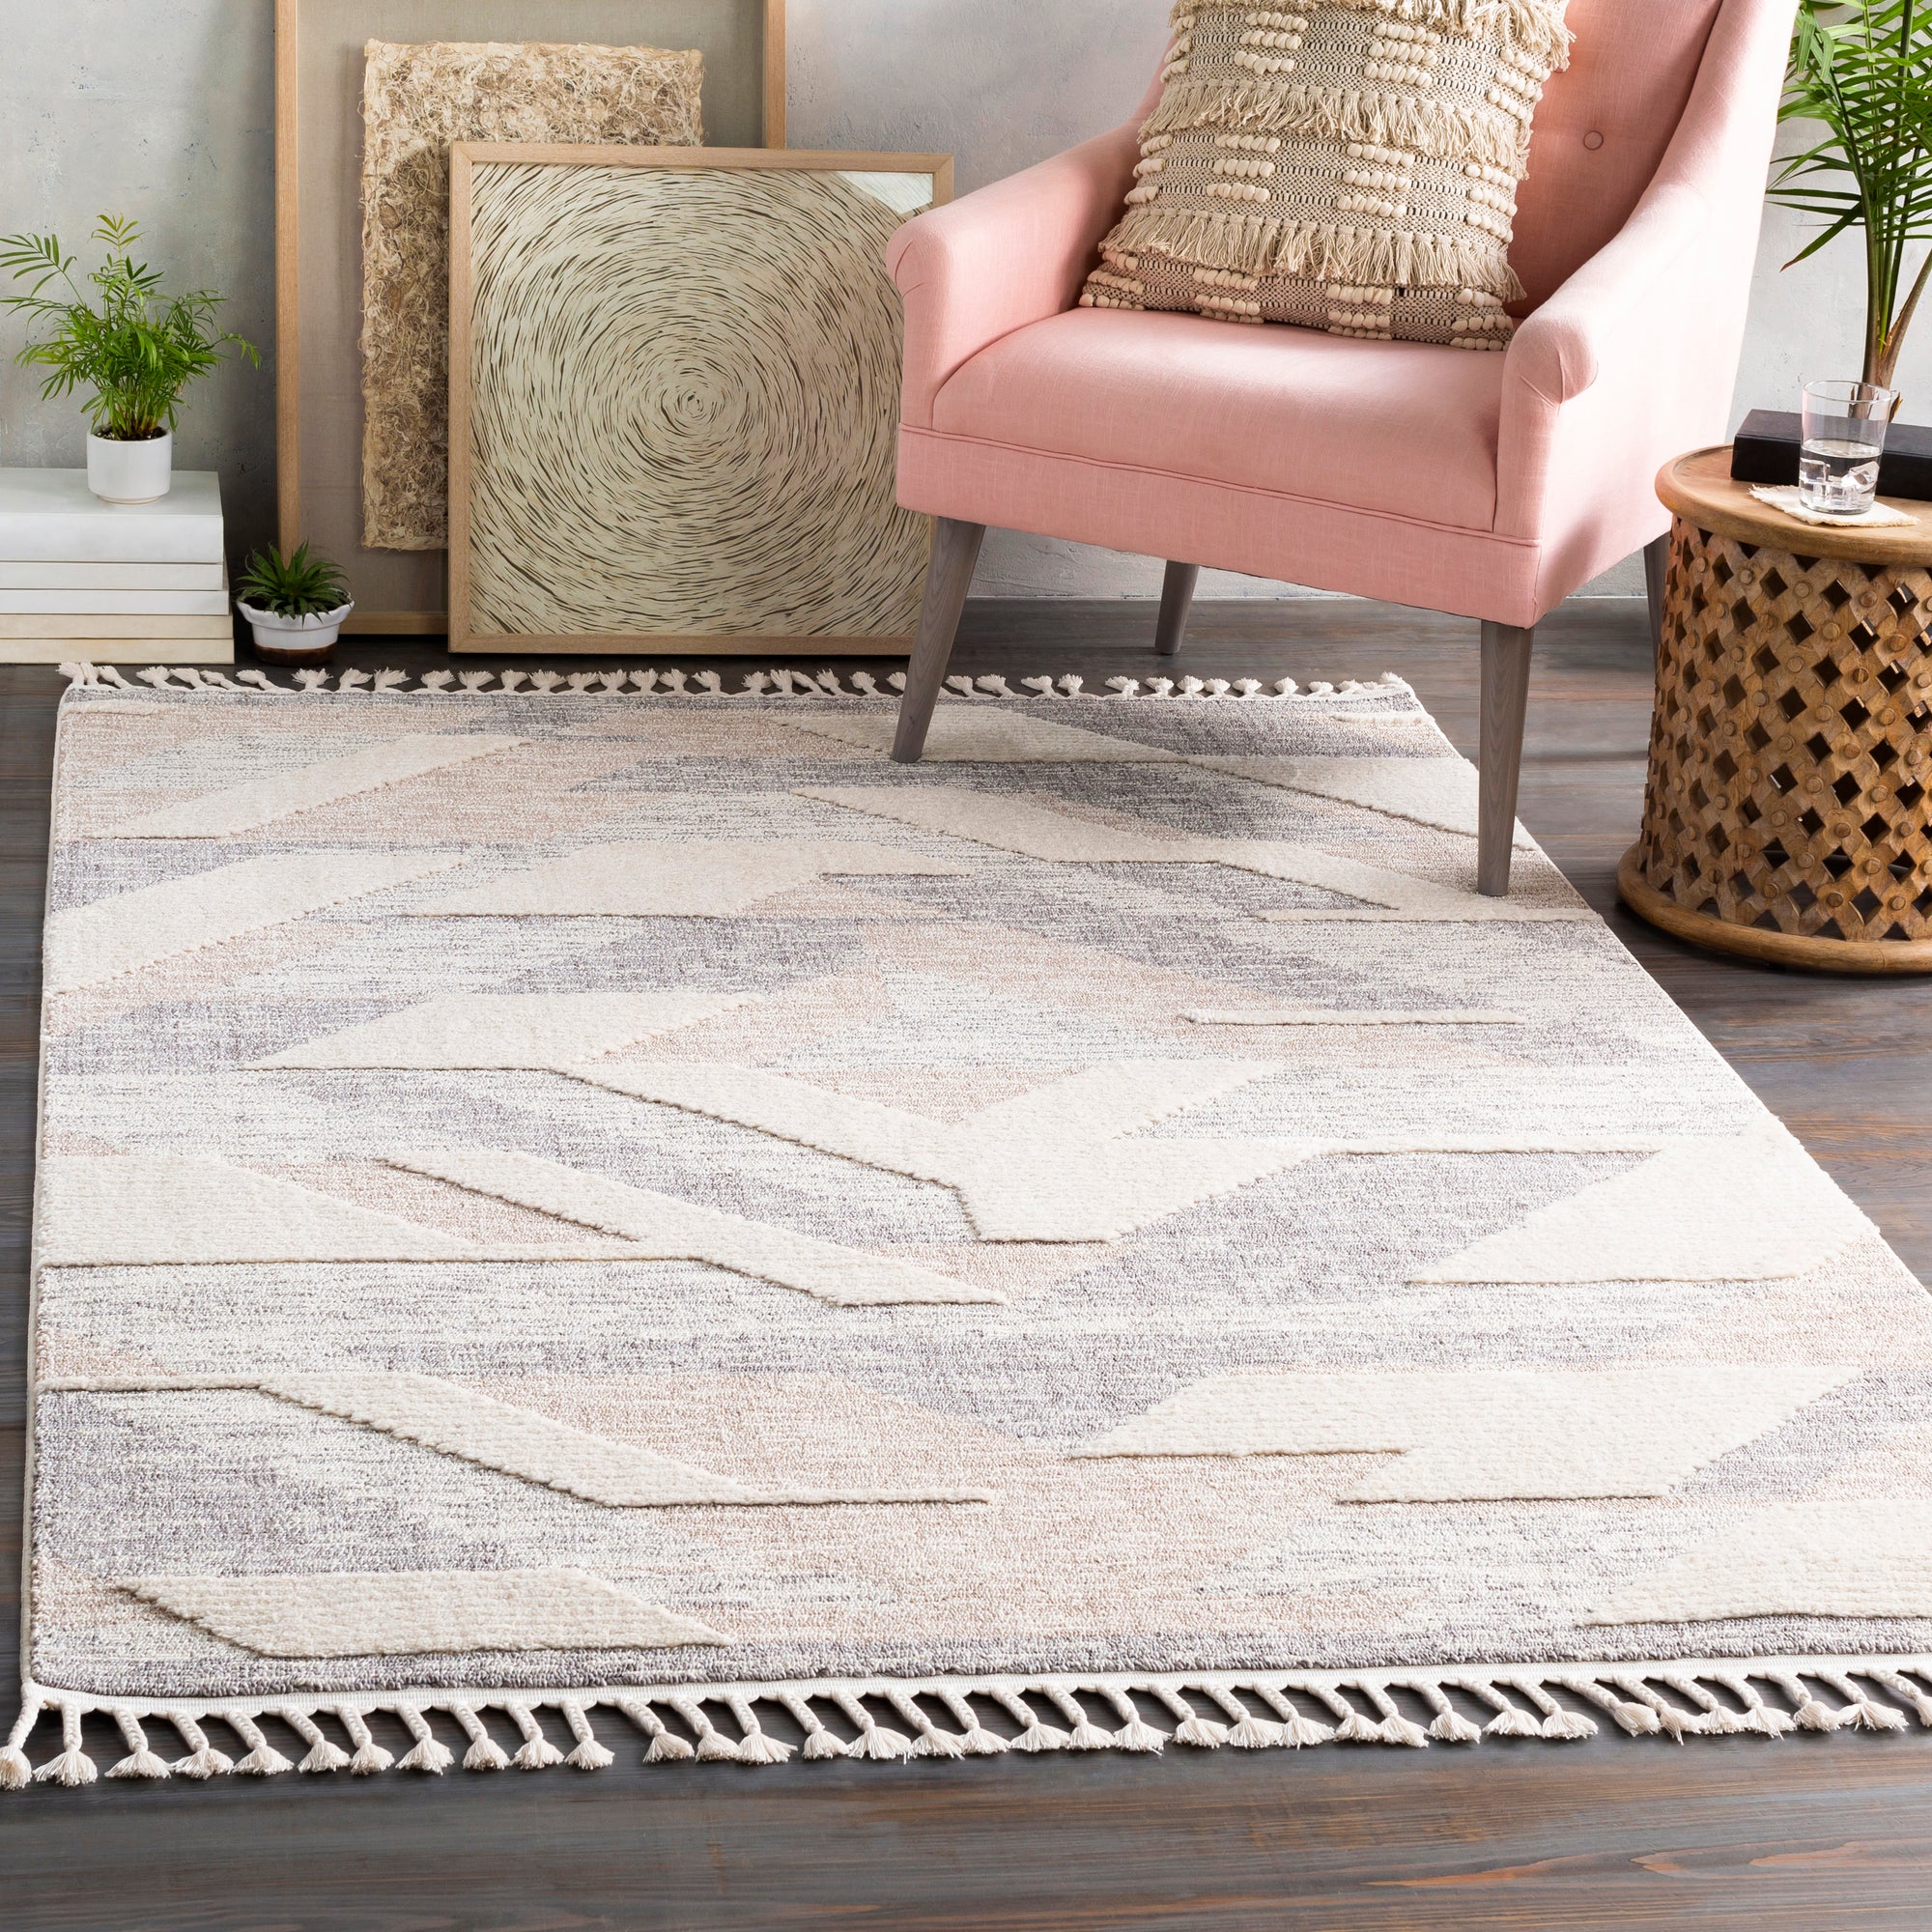 How to Choose an Area Rug for Your Living Room